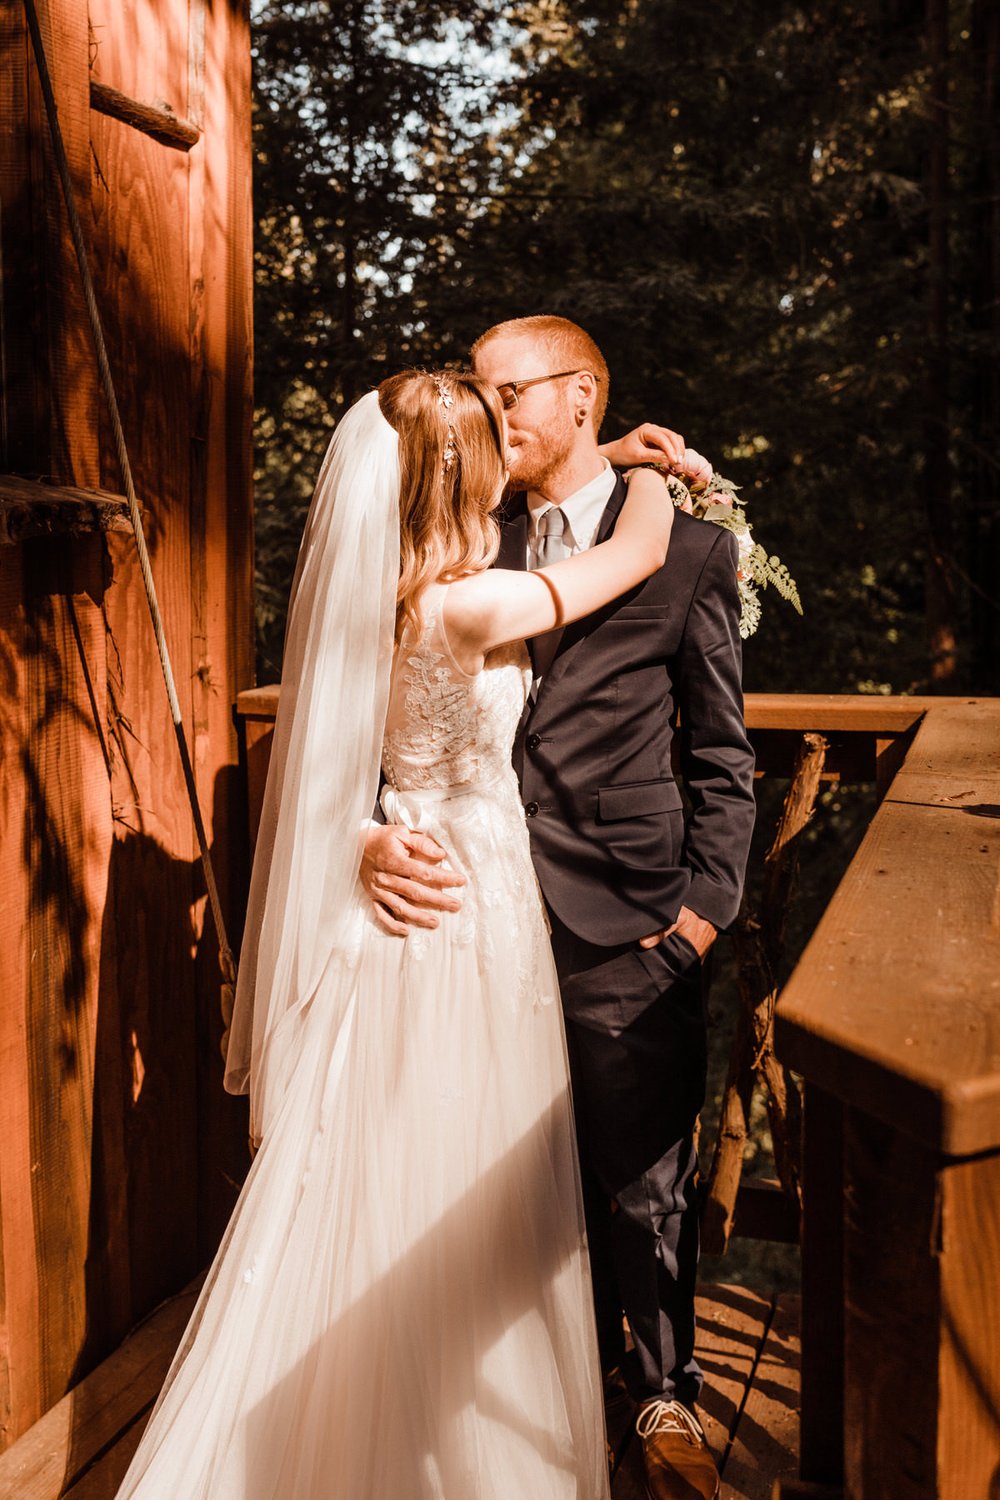 Bride-and-Groom-Photos-in-Redwoods-Airbnb-Treehouse-in-Northern-California (2).jpg